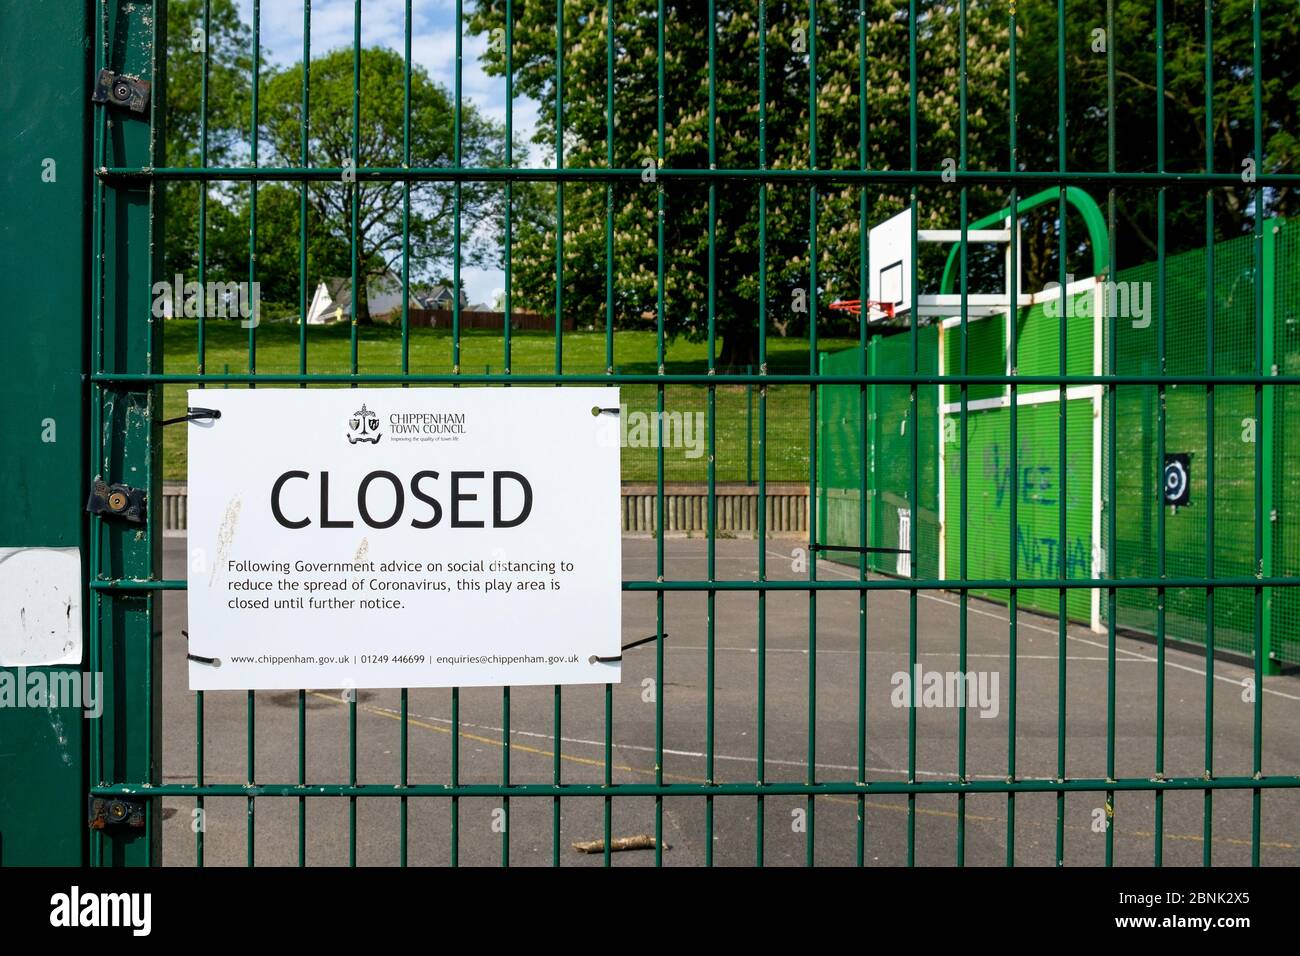 A sign stating that a children's playground is closed due to the coronavirus covid 19 outbreak is pictured in a public park in Chippenham, Wiltshire Stock Photo